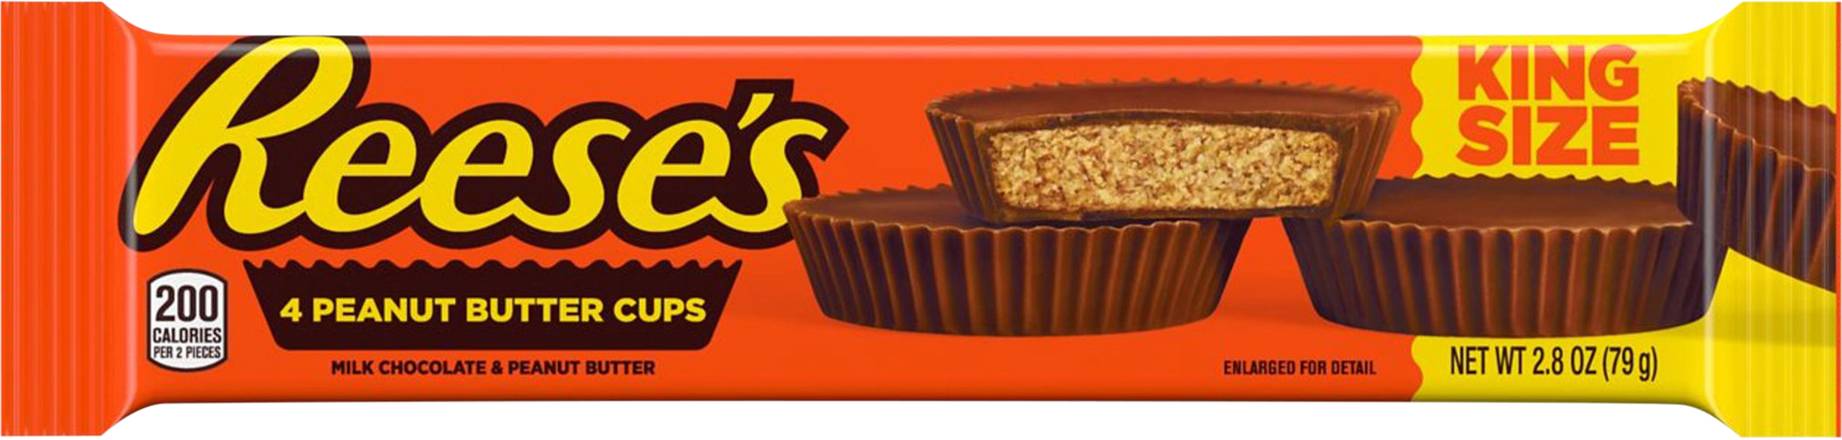 Reese's Milk Chocolate and Peanut Butter Cups (4 ct)